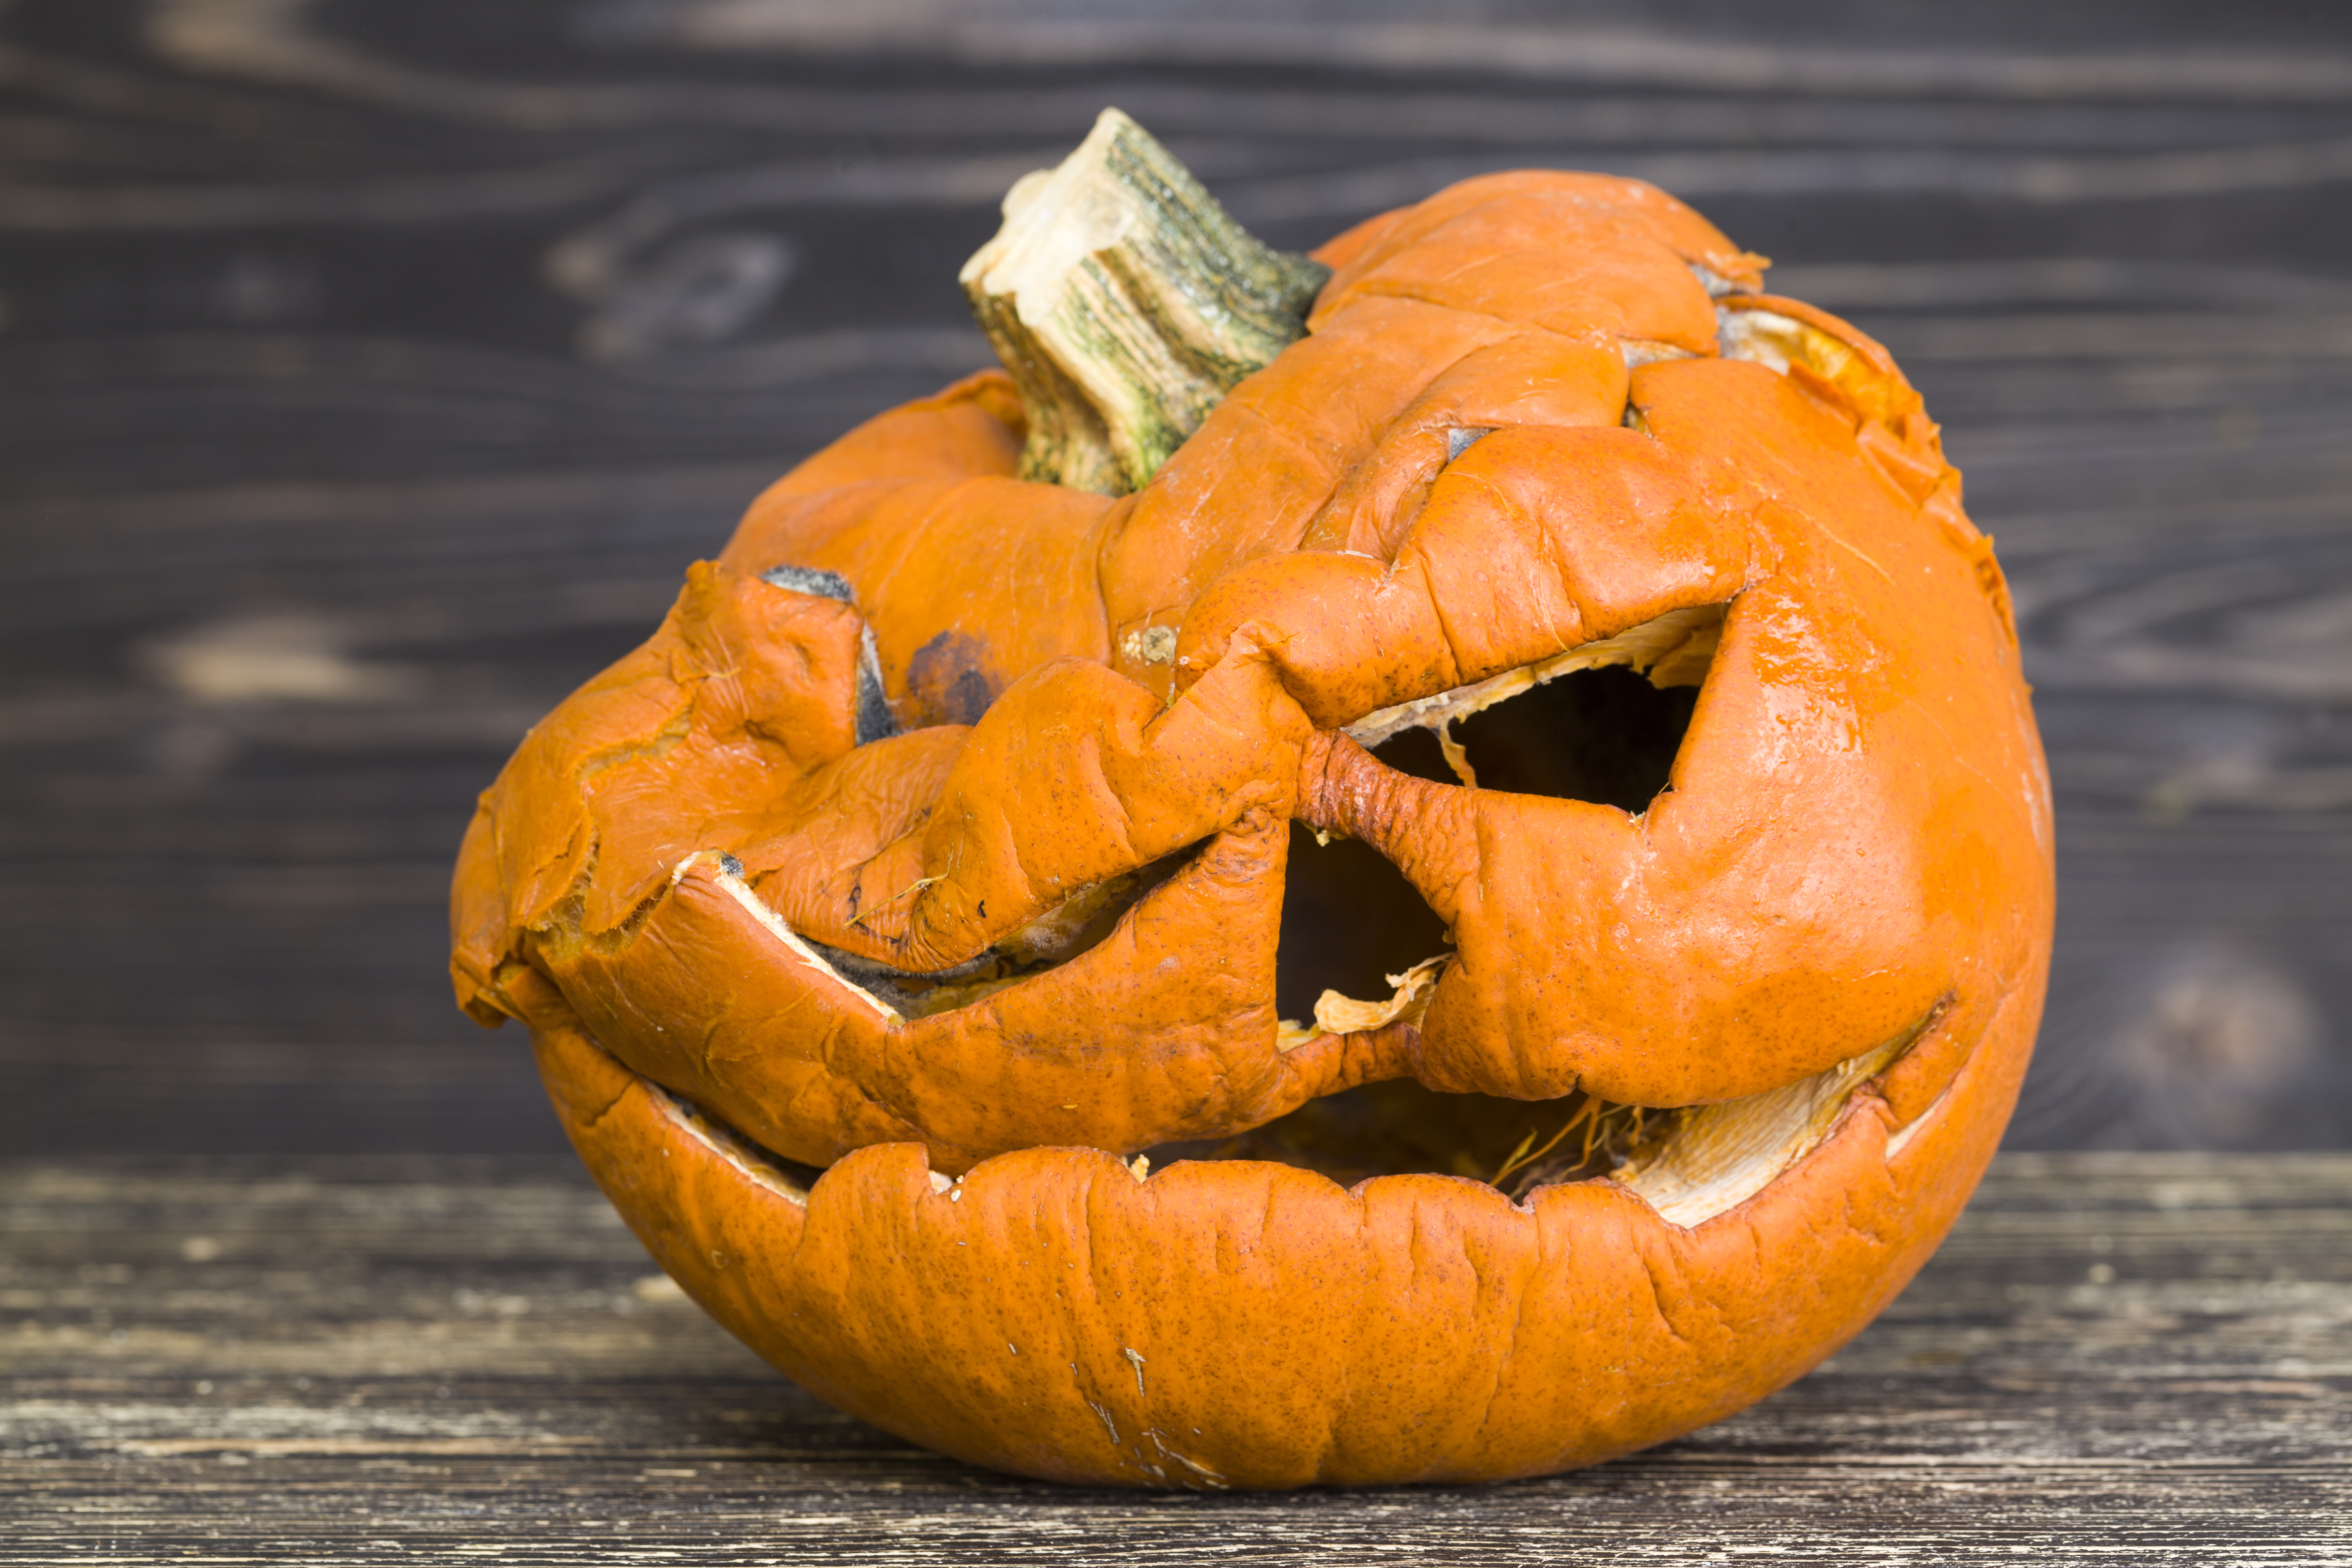 Other tips to keep your pumpkins fresh